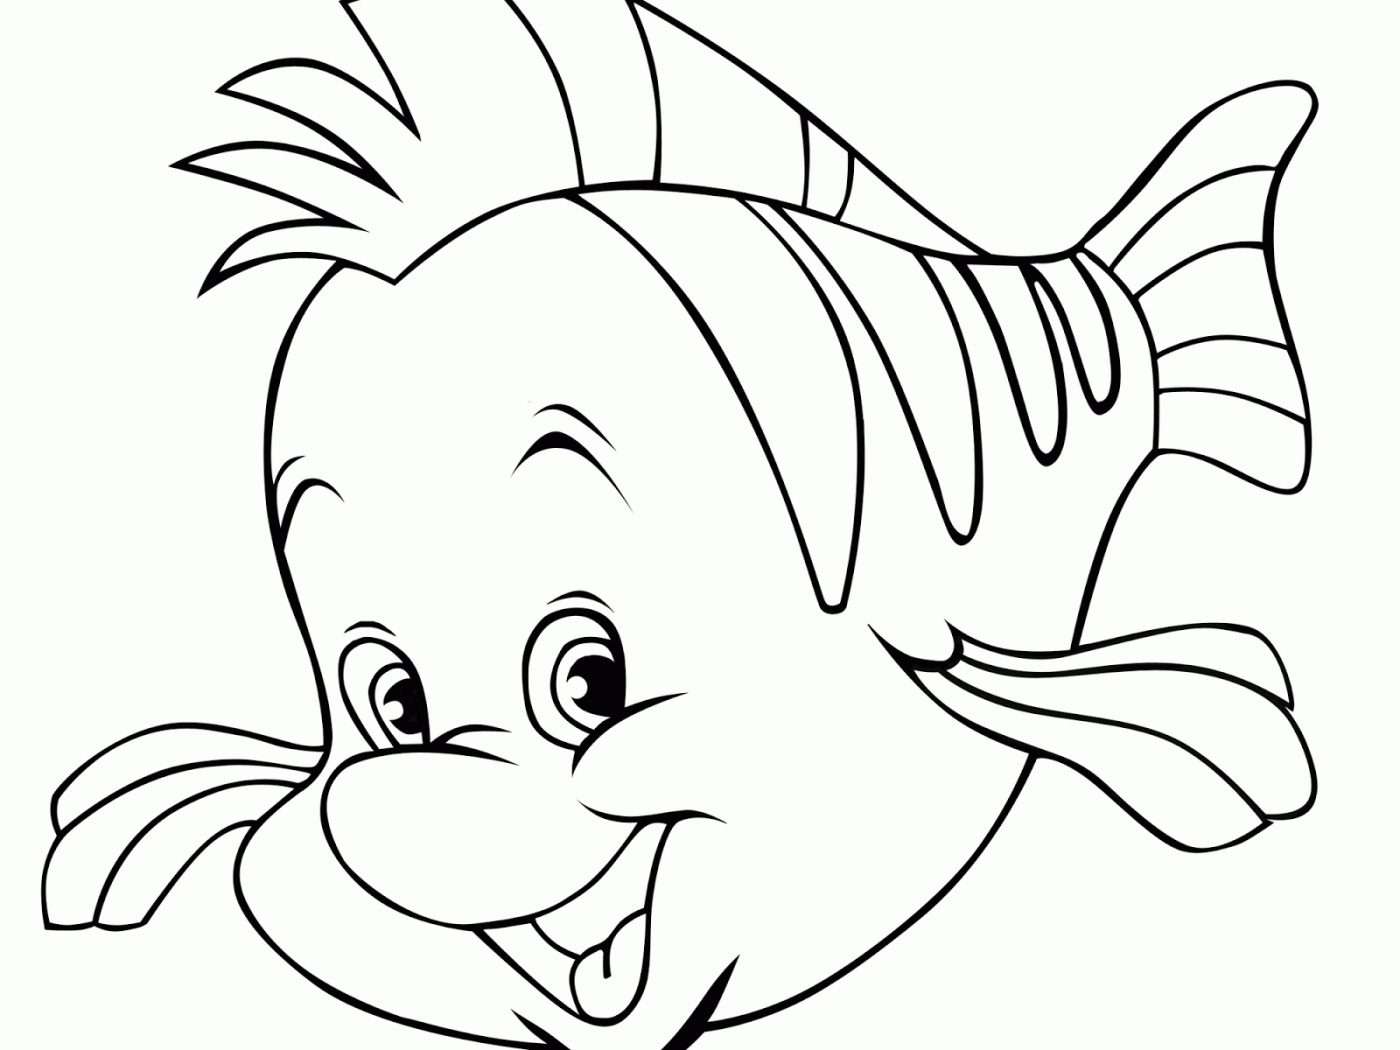 Easy Fish Coloring Pages at GetColorings.com | Free printable colorings ...